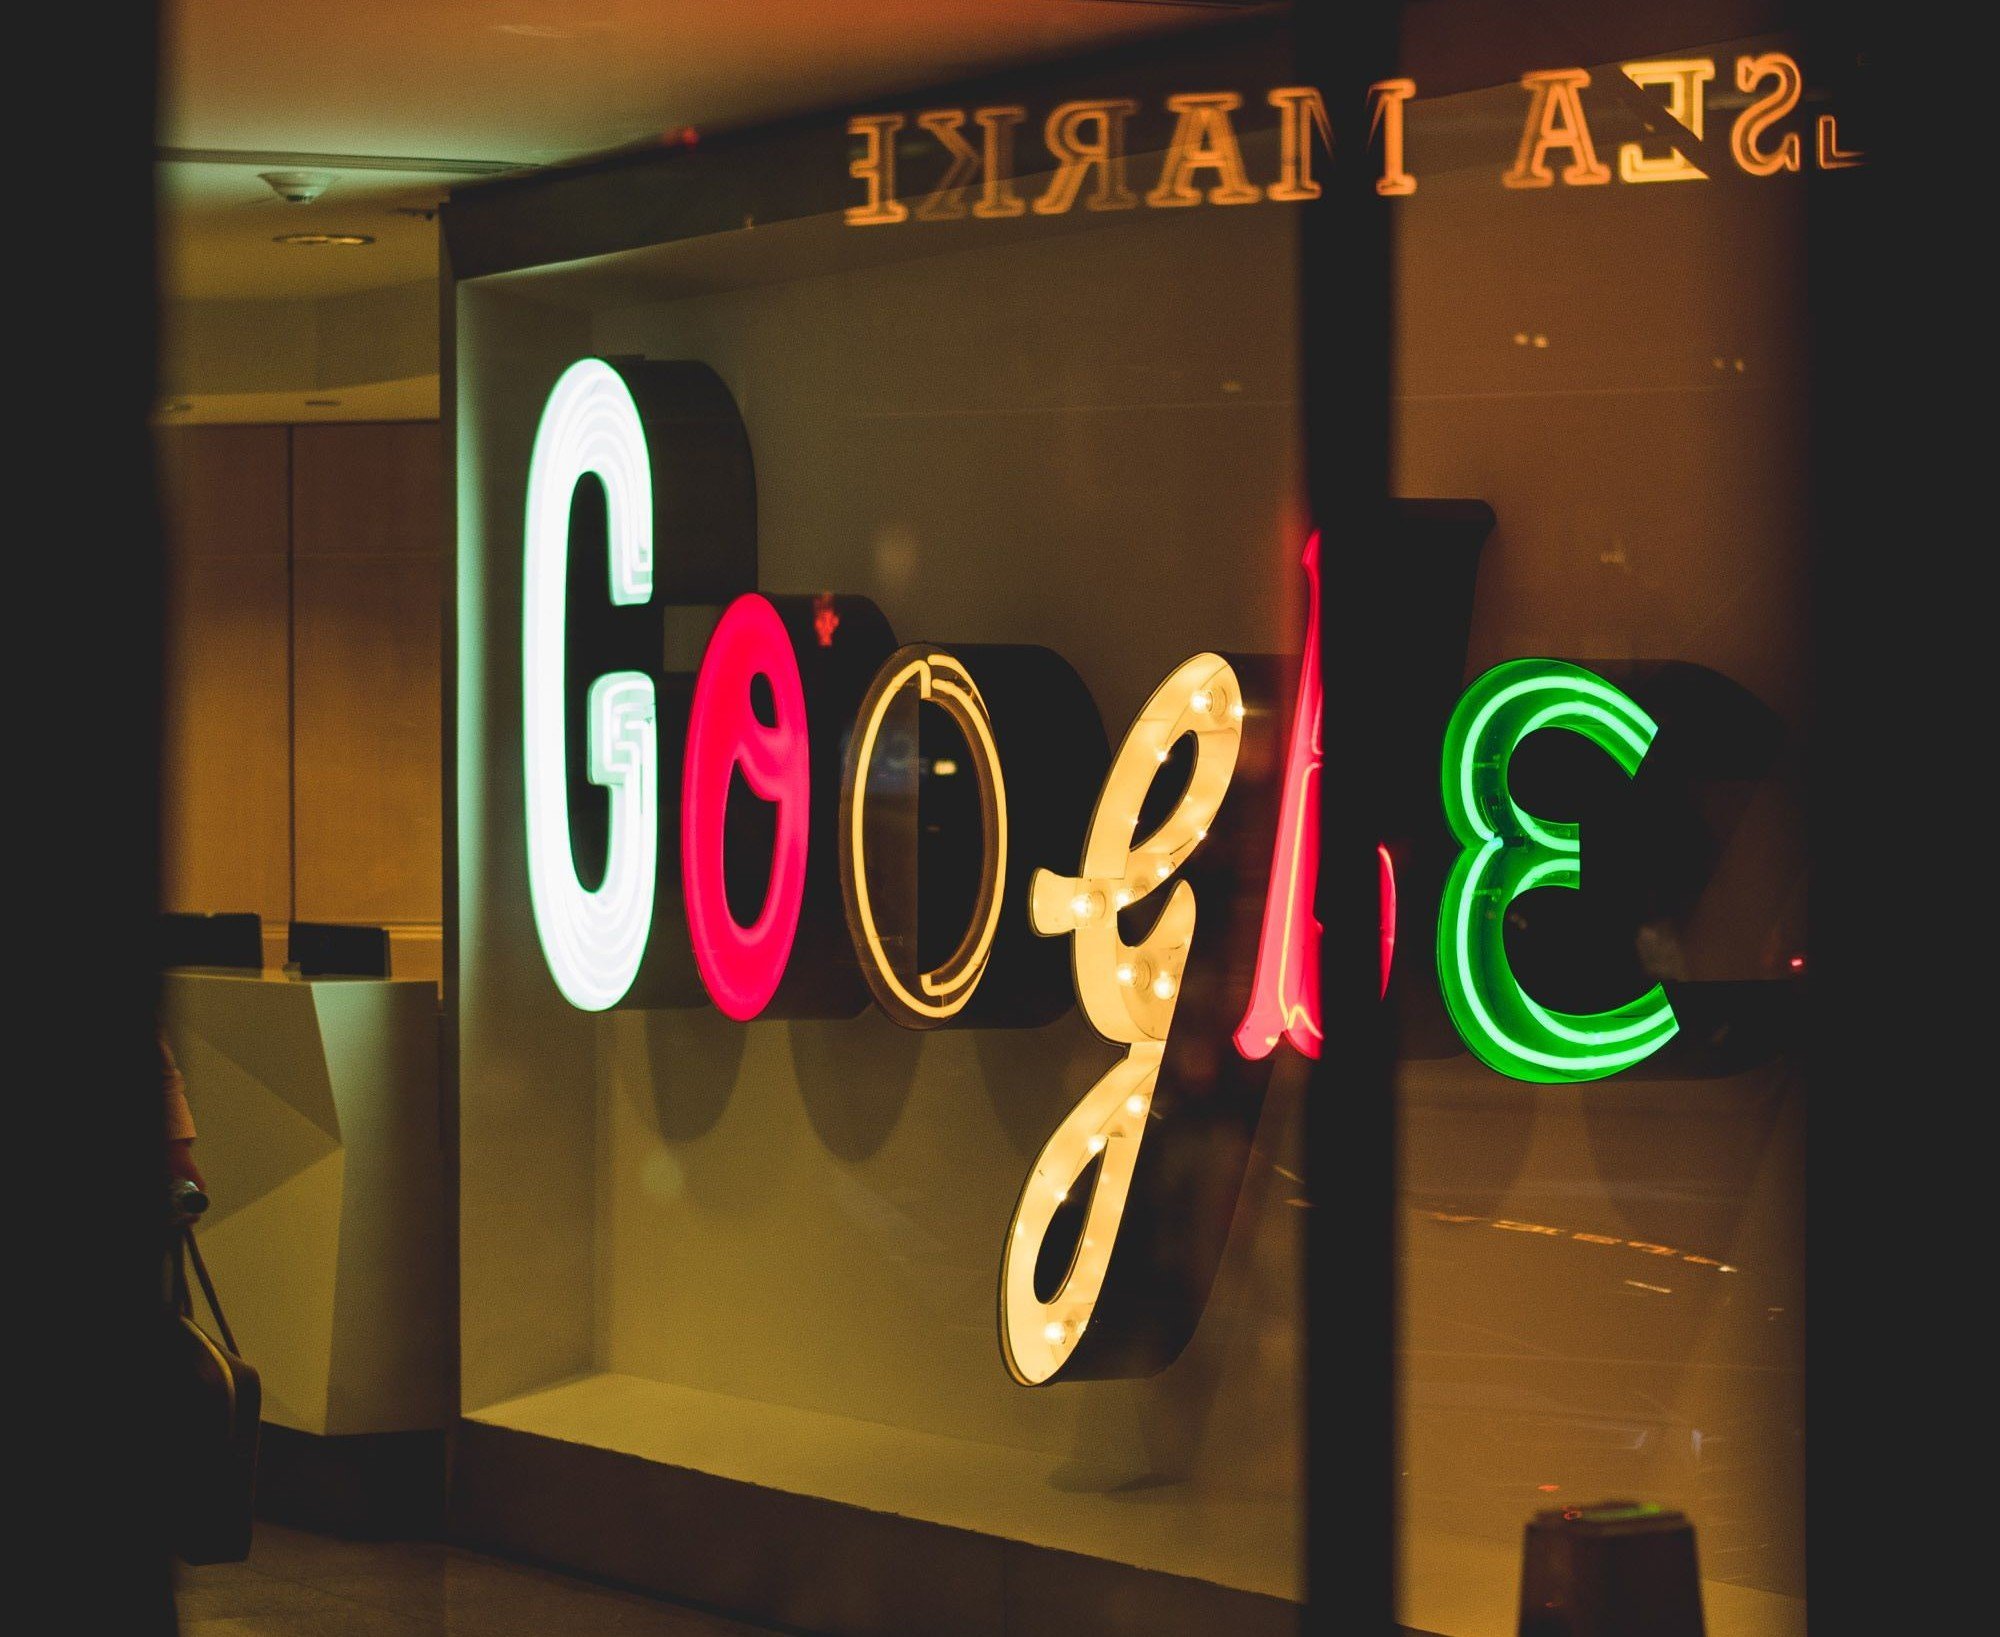 Artificial intelligence in the advertising business: Google plans AI-driven ads